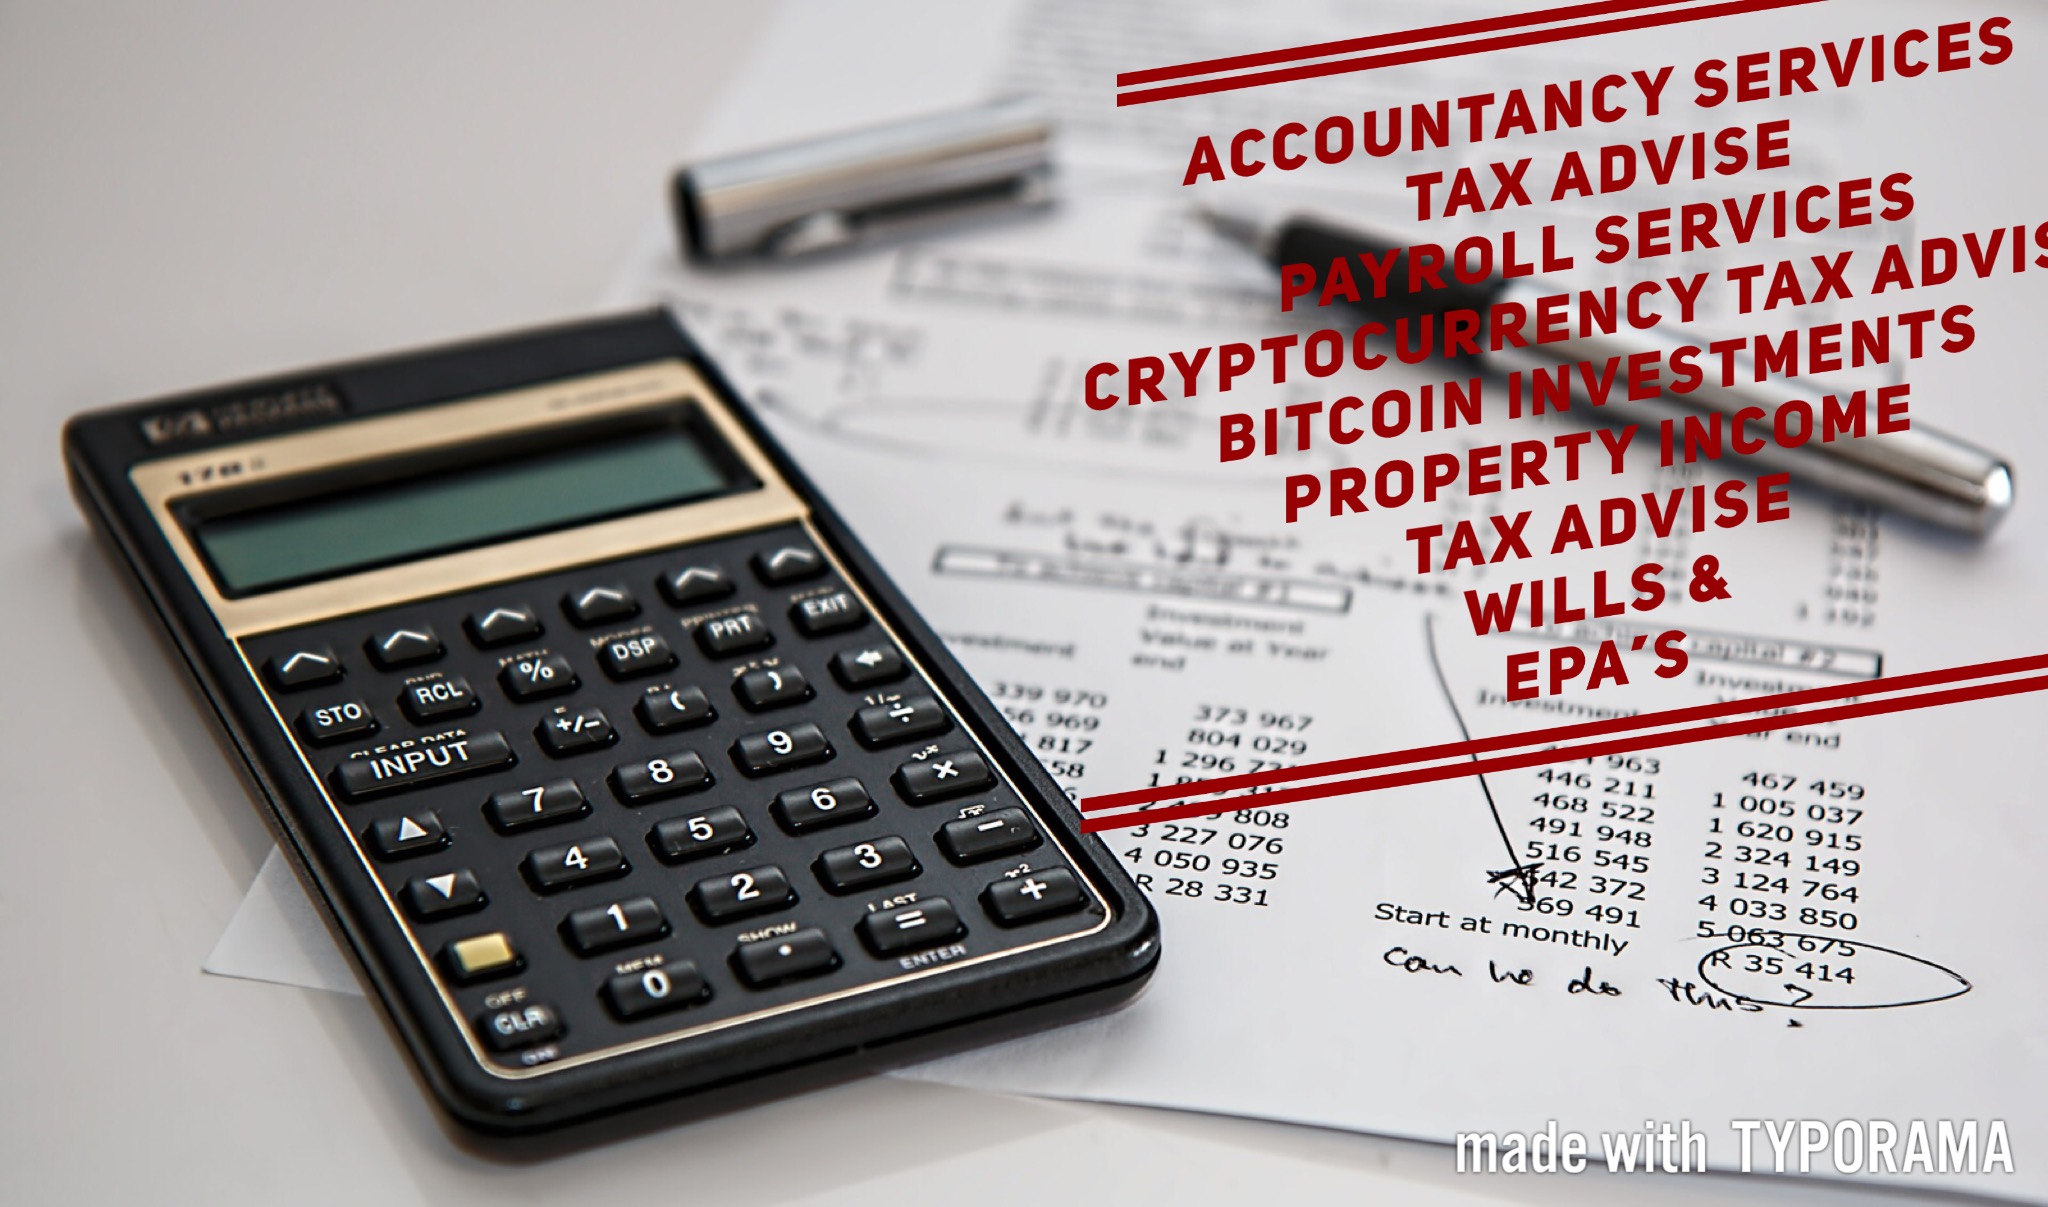 Accountancy Services, Tax Advice, Payroll Services, Cryptocurrency Tax Advice, Bitcoin Investments, Property Income, Tax Advice, Wills & EPAs. Capstone Associates.